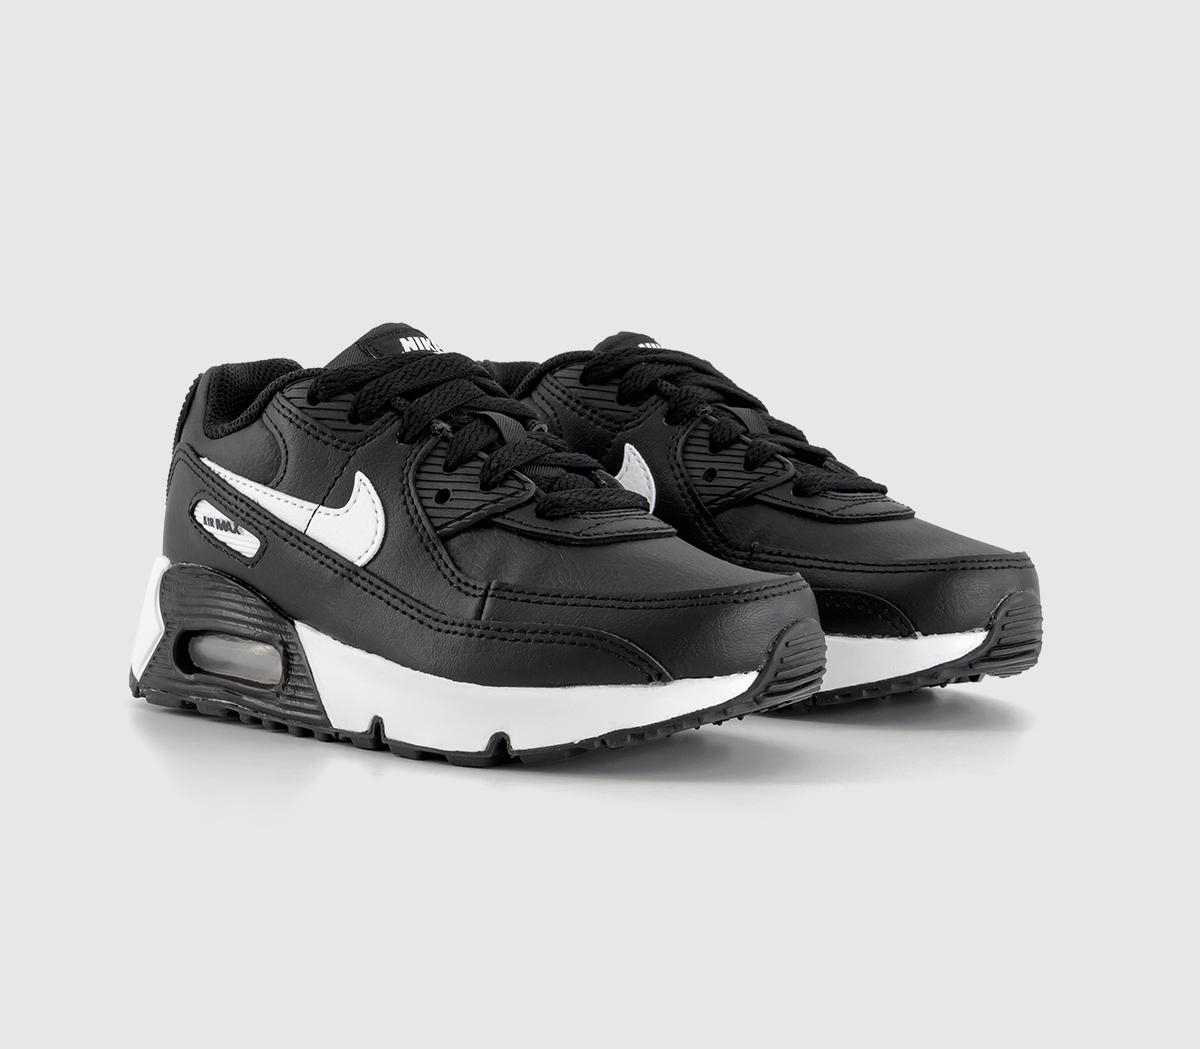 Nike Kids Air Max 90 Ps Trainers Black White Black, 10 Youth